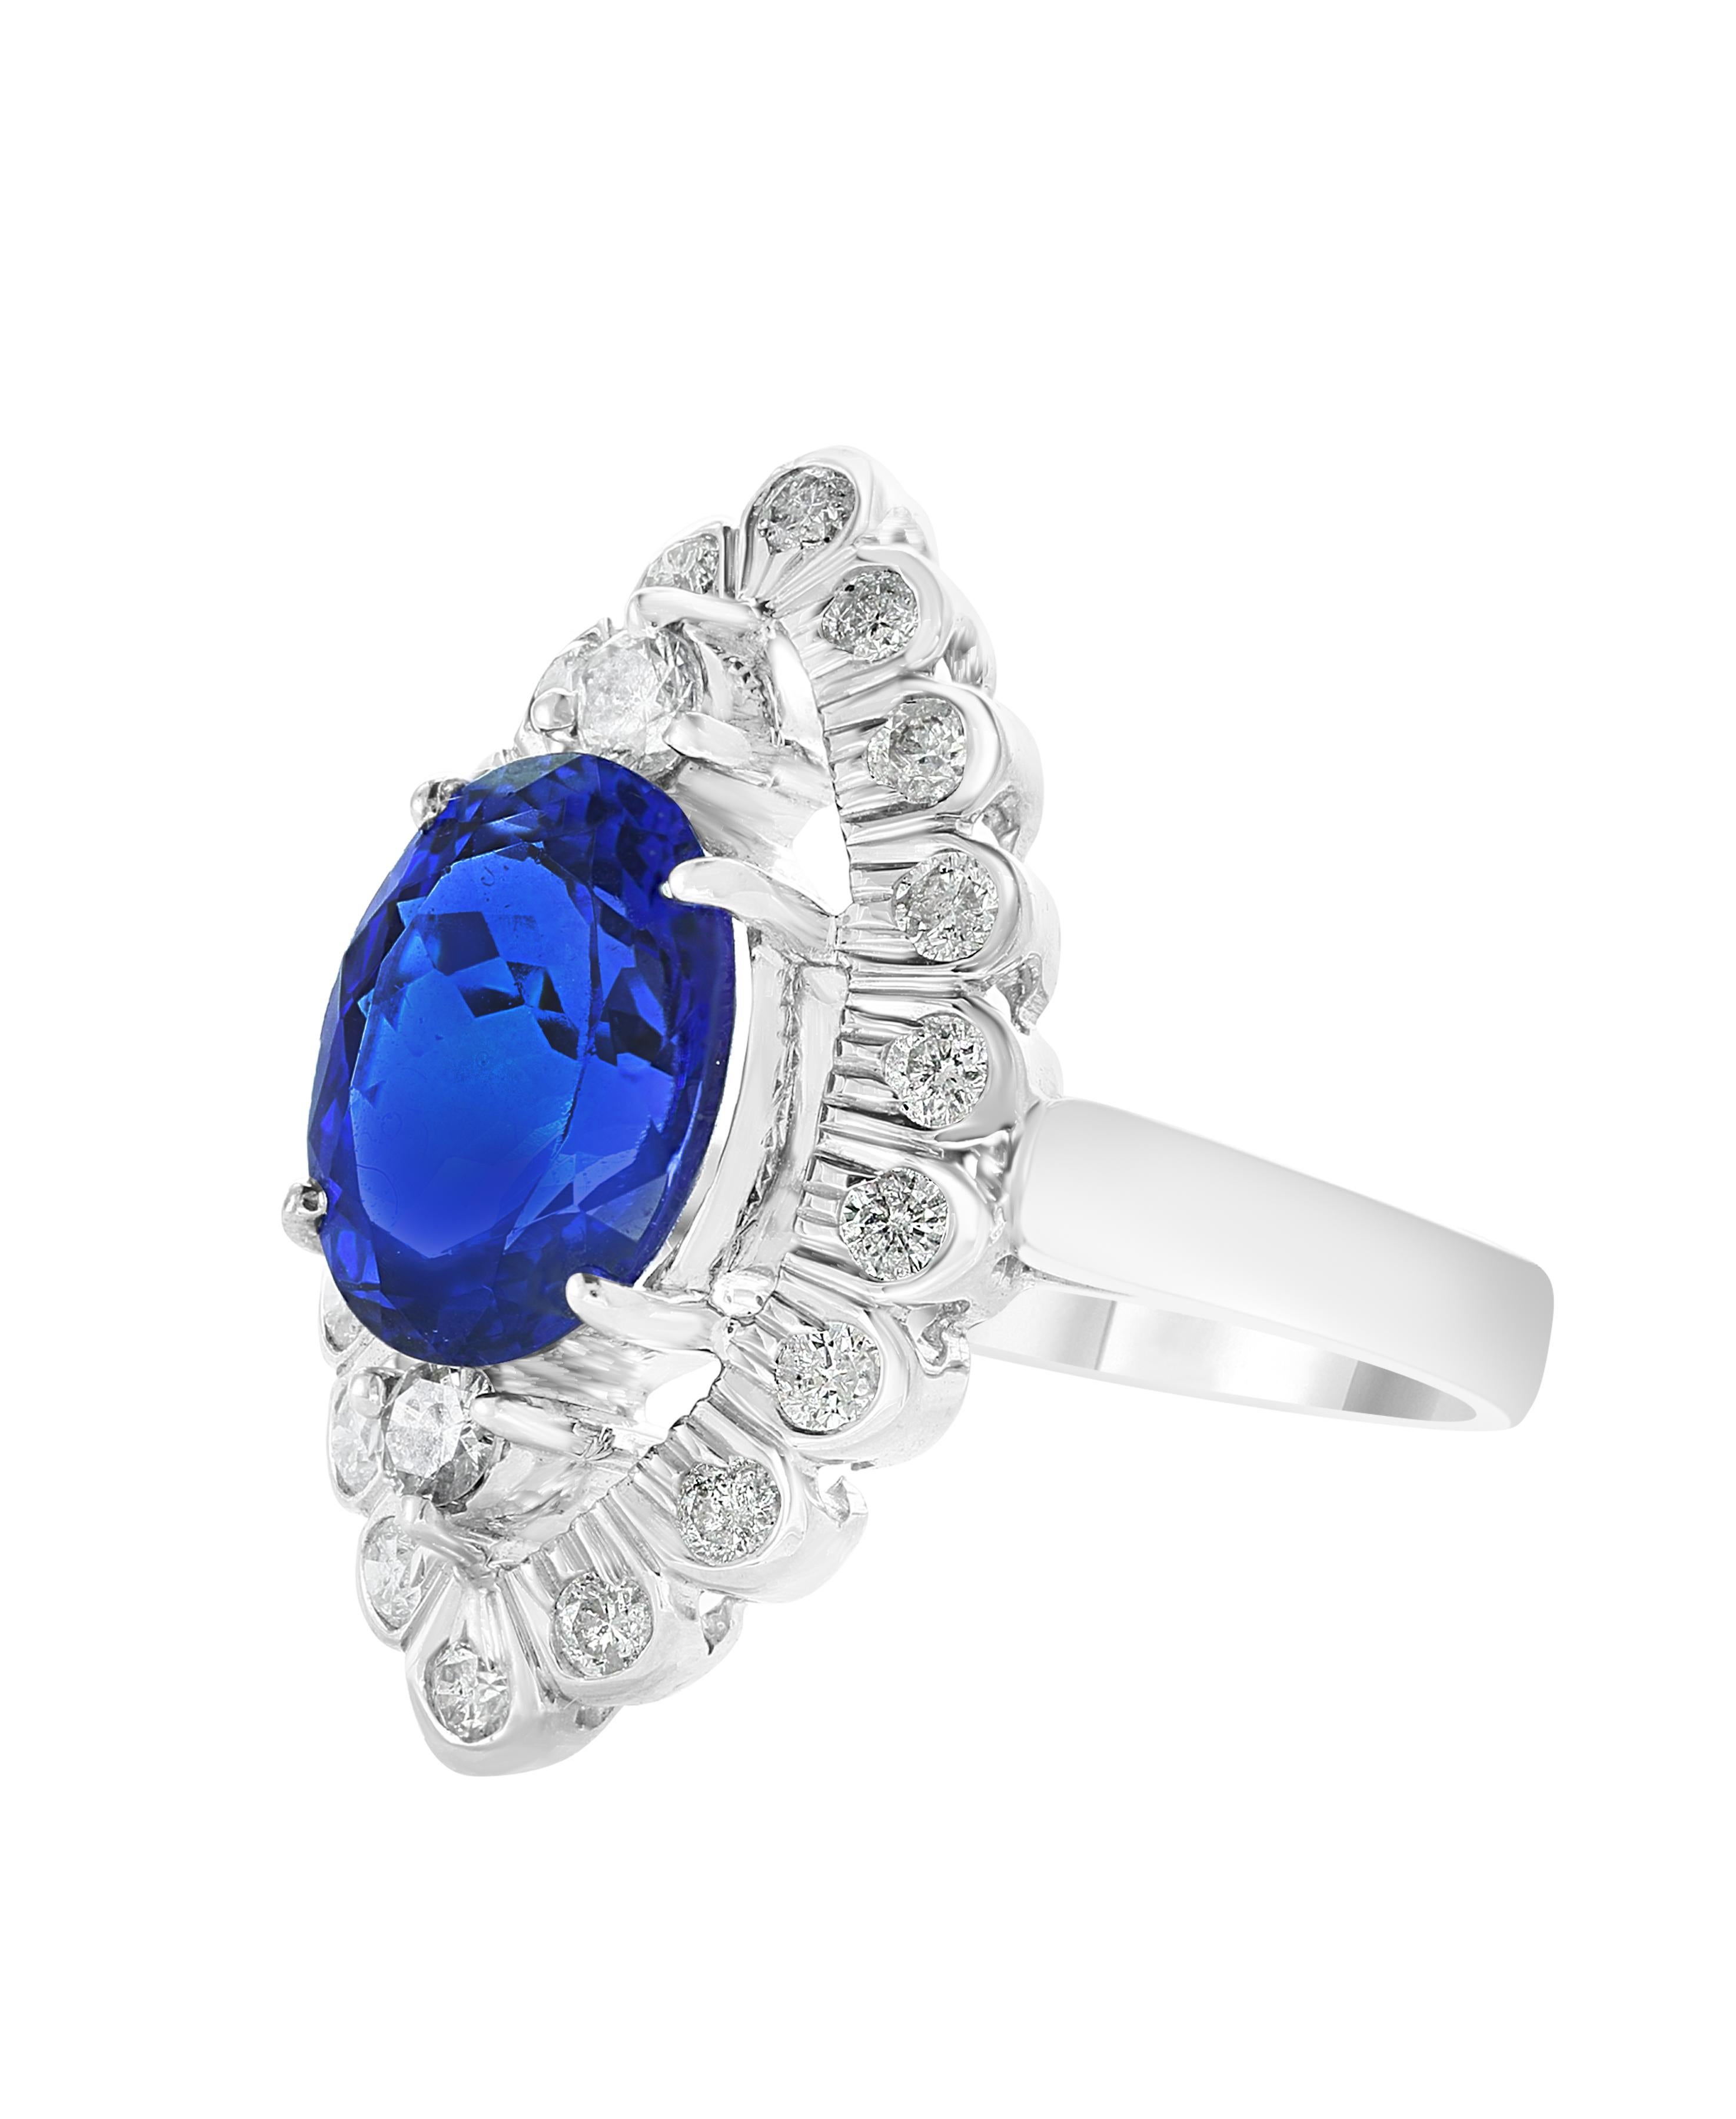 This extraordinary, 3.65 carat tanzanite is truly an extraordinary gemstone. There are  total  of 1.0 carats of shimmering white diamonds, this brilliant Oval-cut gem exhibits the rich violetish-blue color for which these stones are known and so